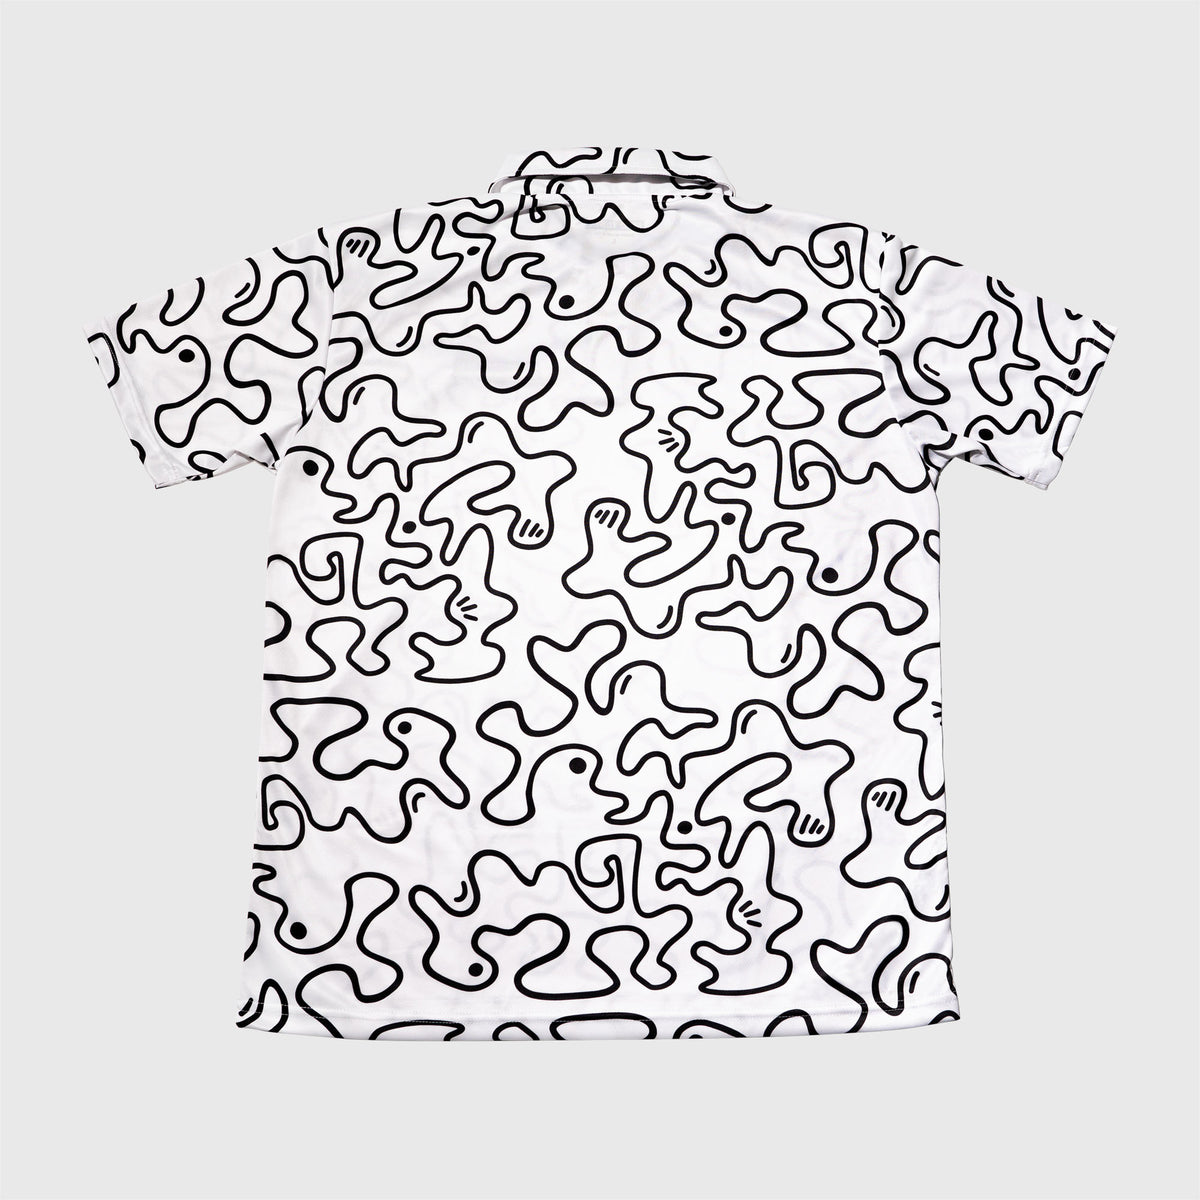 Black / White polo t-shirt, lightweight breathable fabric, squiggle graphic, and embroidered MAD TASTY logo in top right corner. 